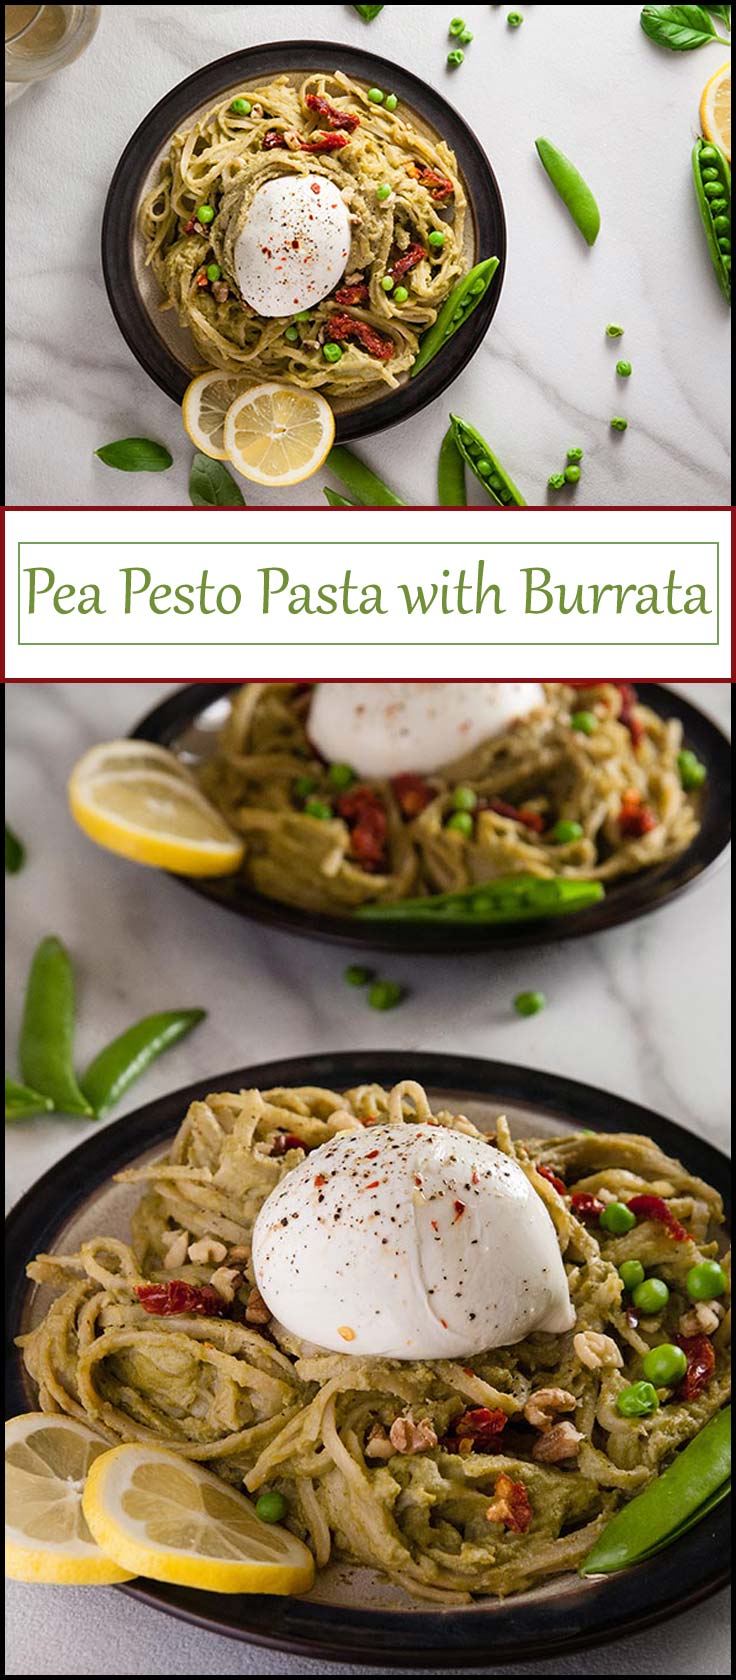 Pea Pesto Pasta with burrata is ready in 20 minutes and makes a perfect spring dinner from www.seasonedsprinkles.com